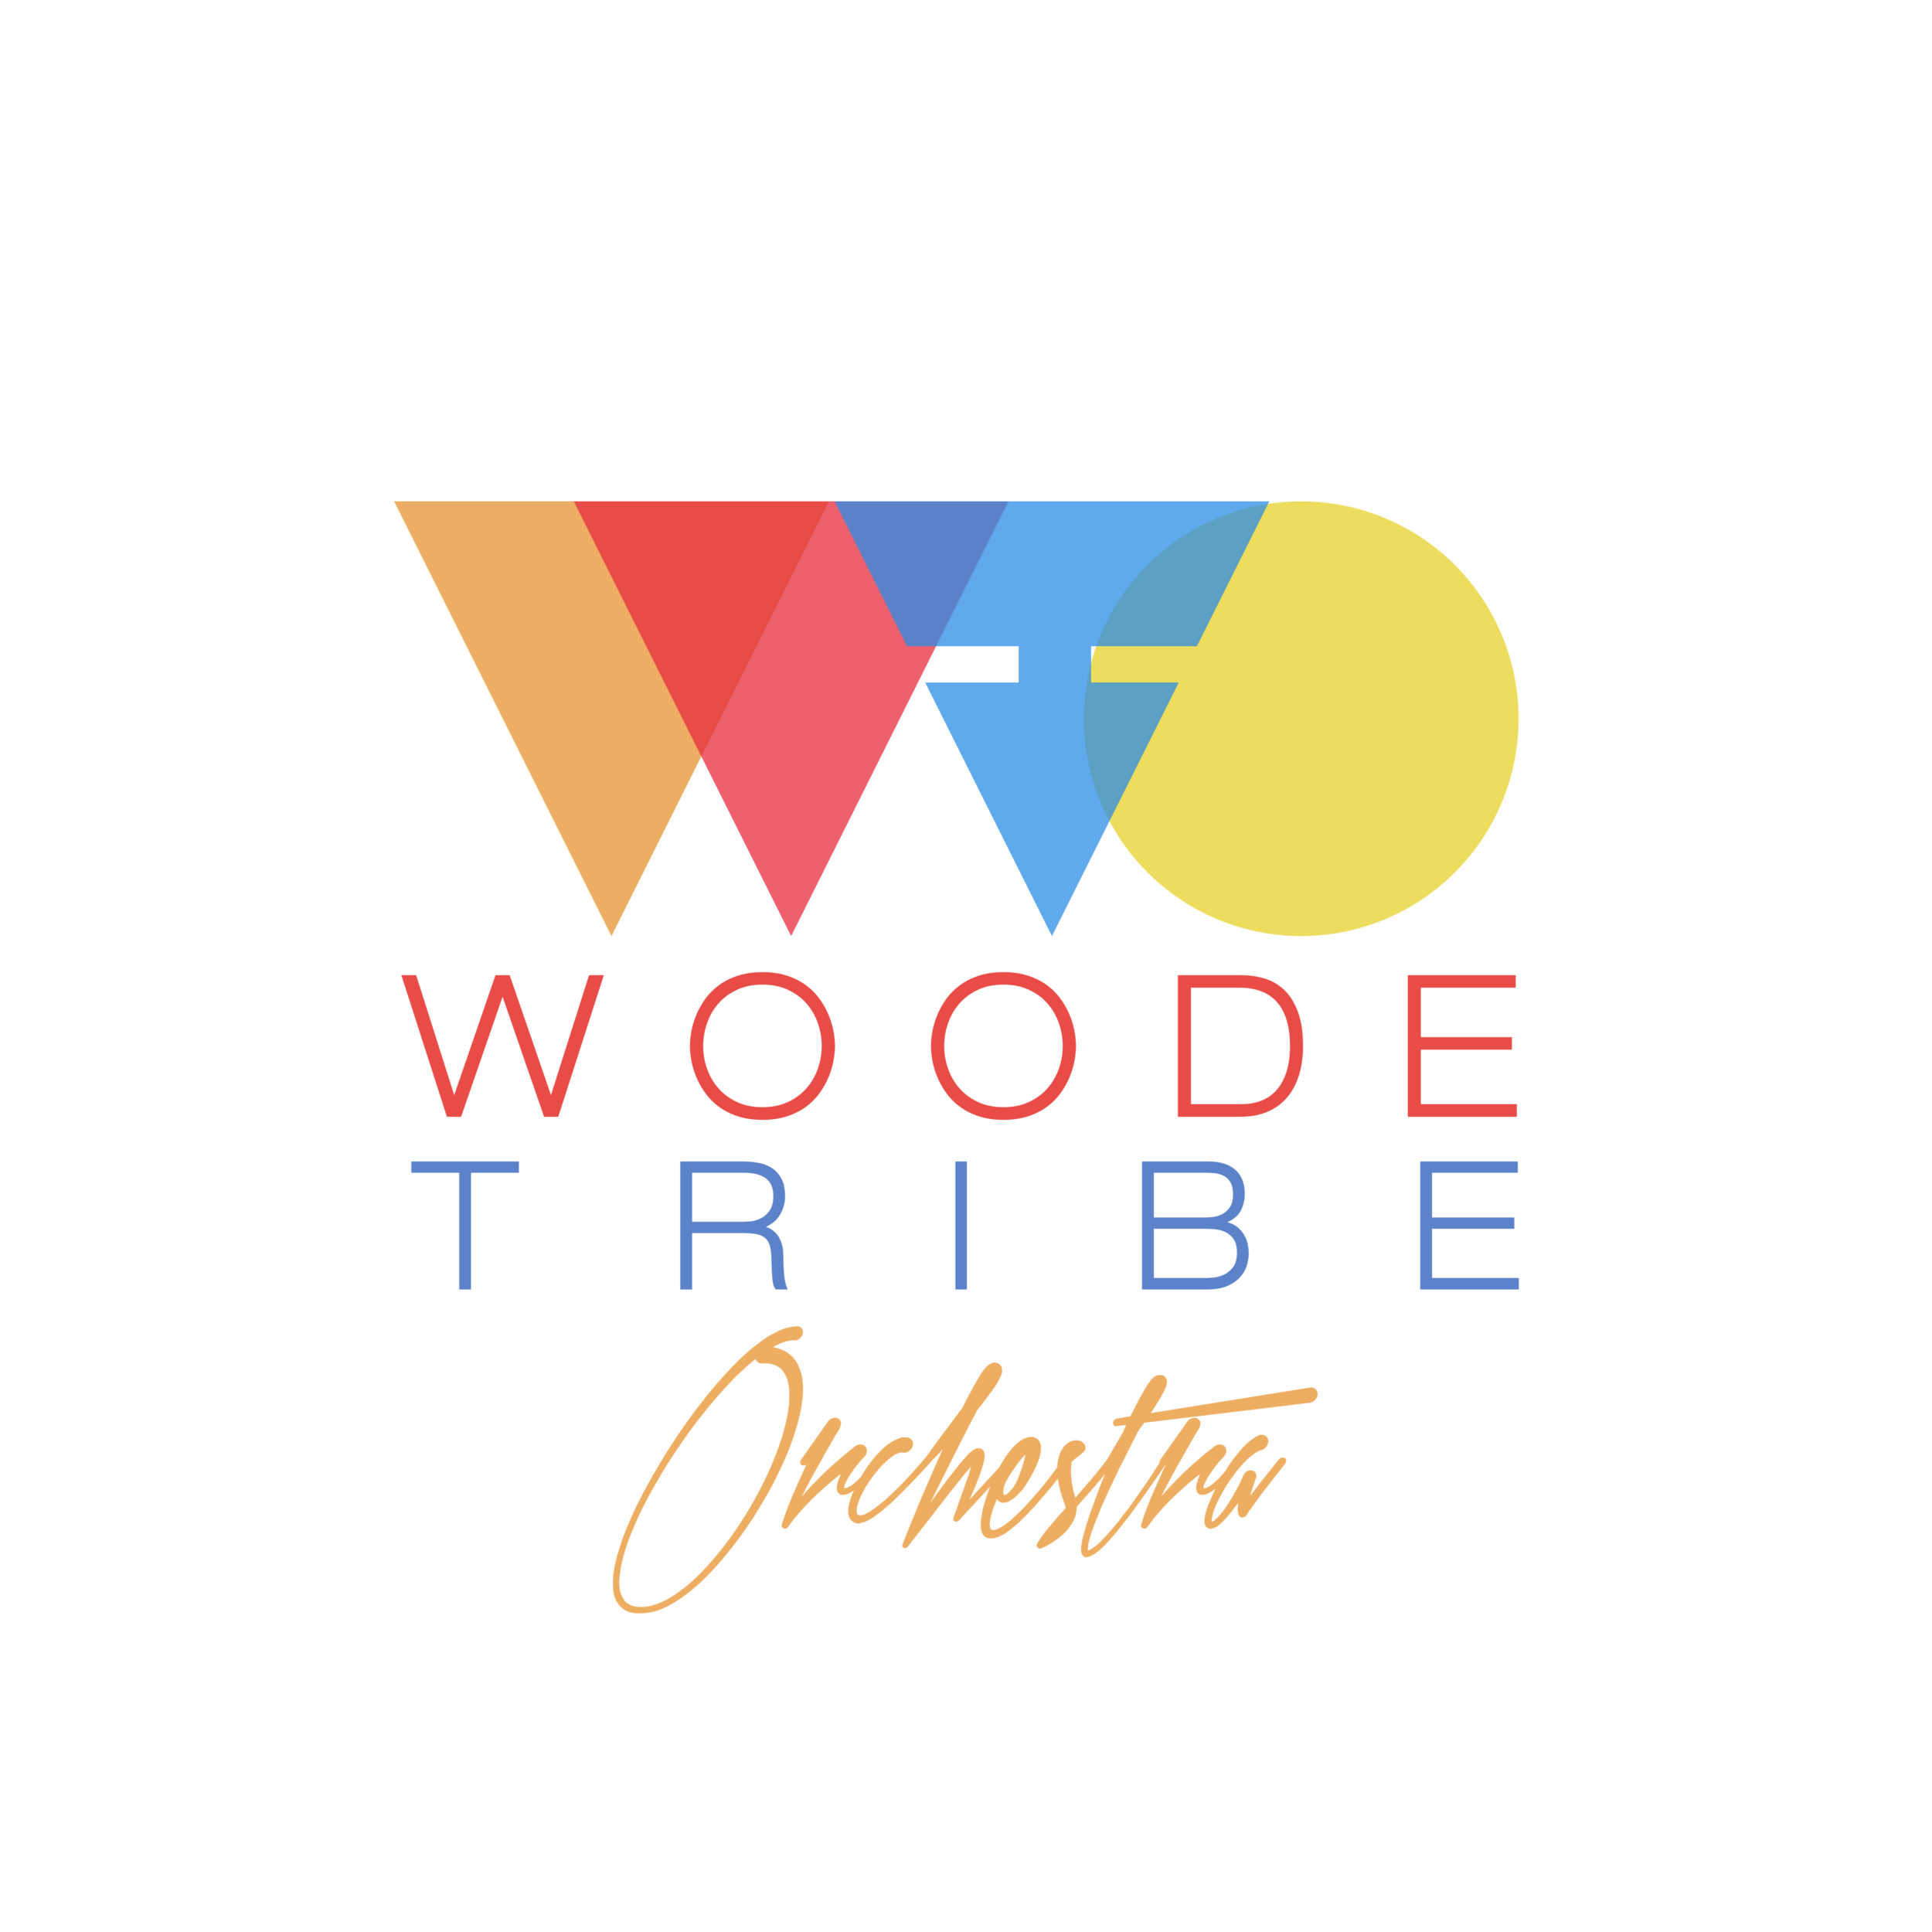 Wood Tribe Orchestra Logo - Final Draft.png